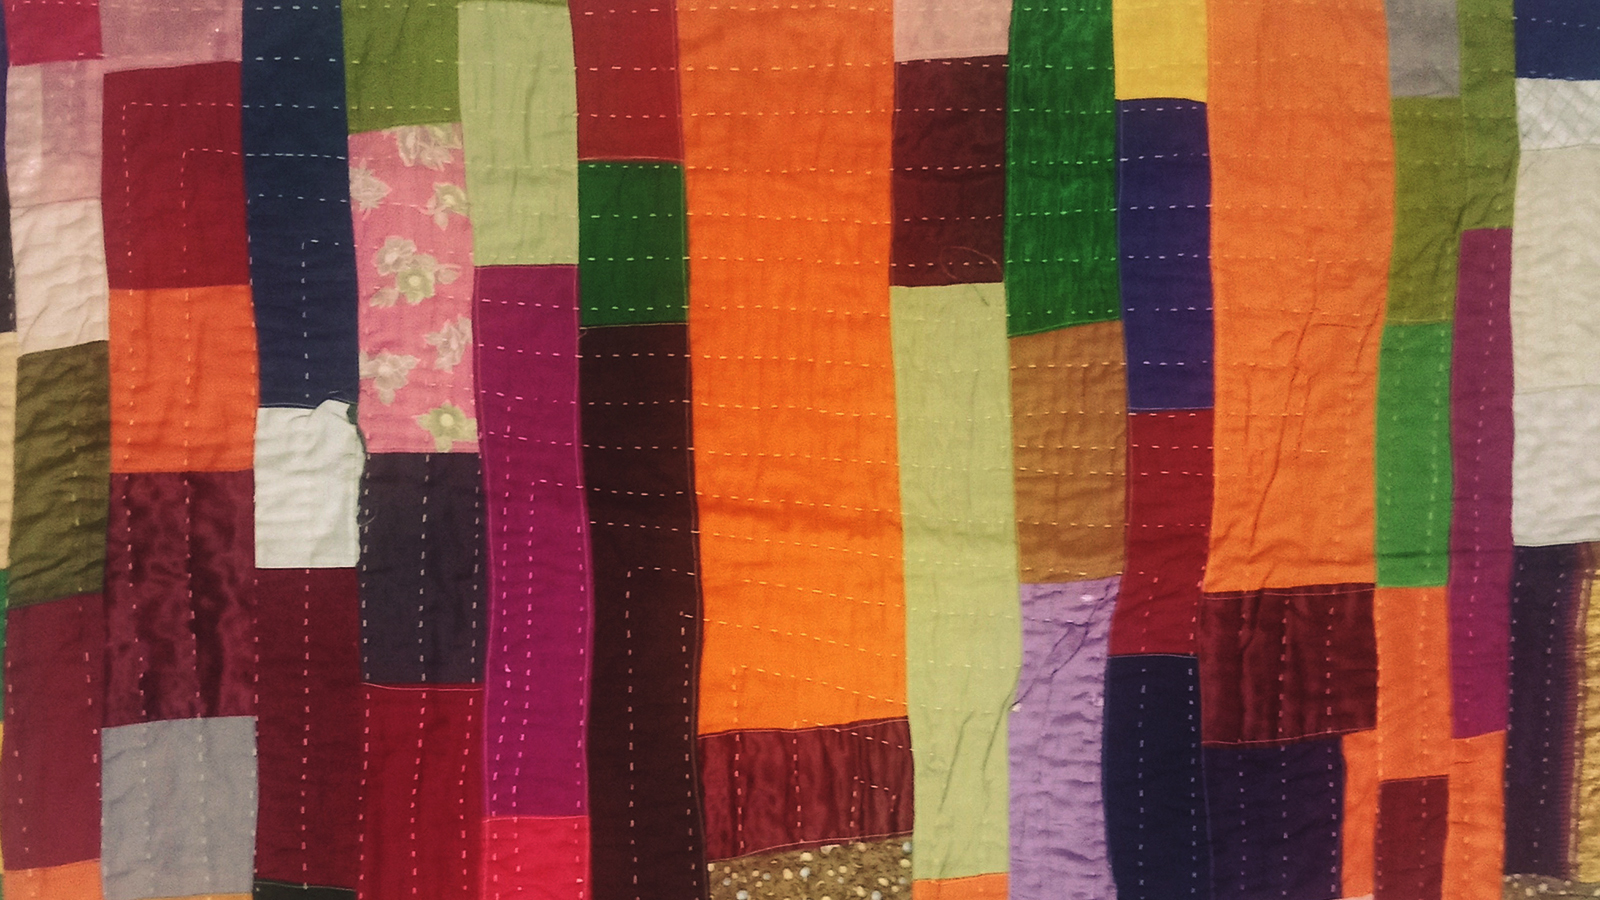 "Upcycled quilts traditional Indian craft indiaartndesign"